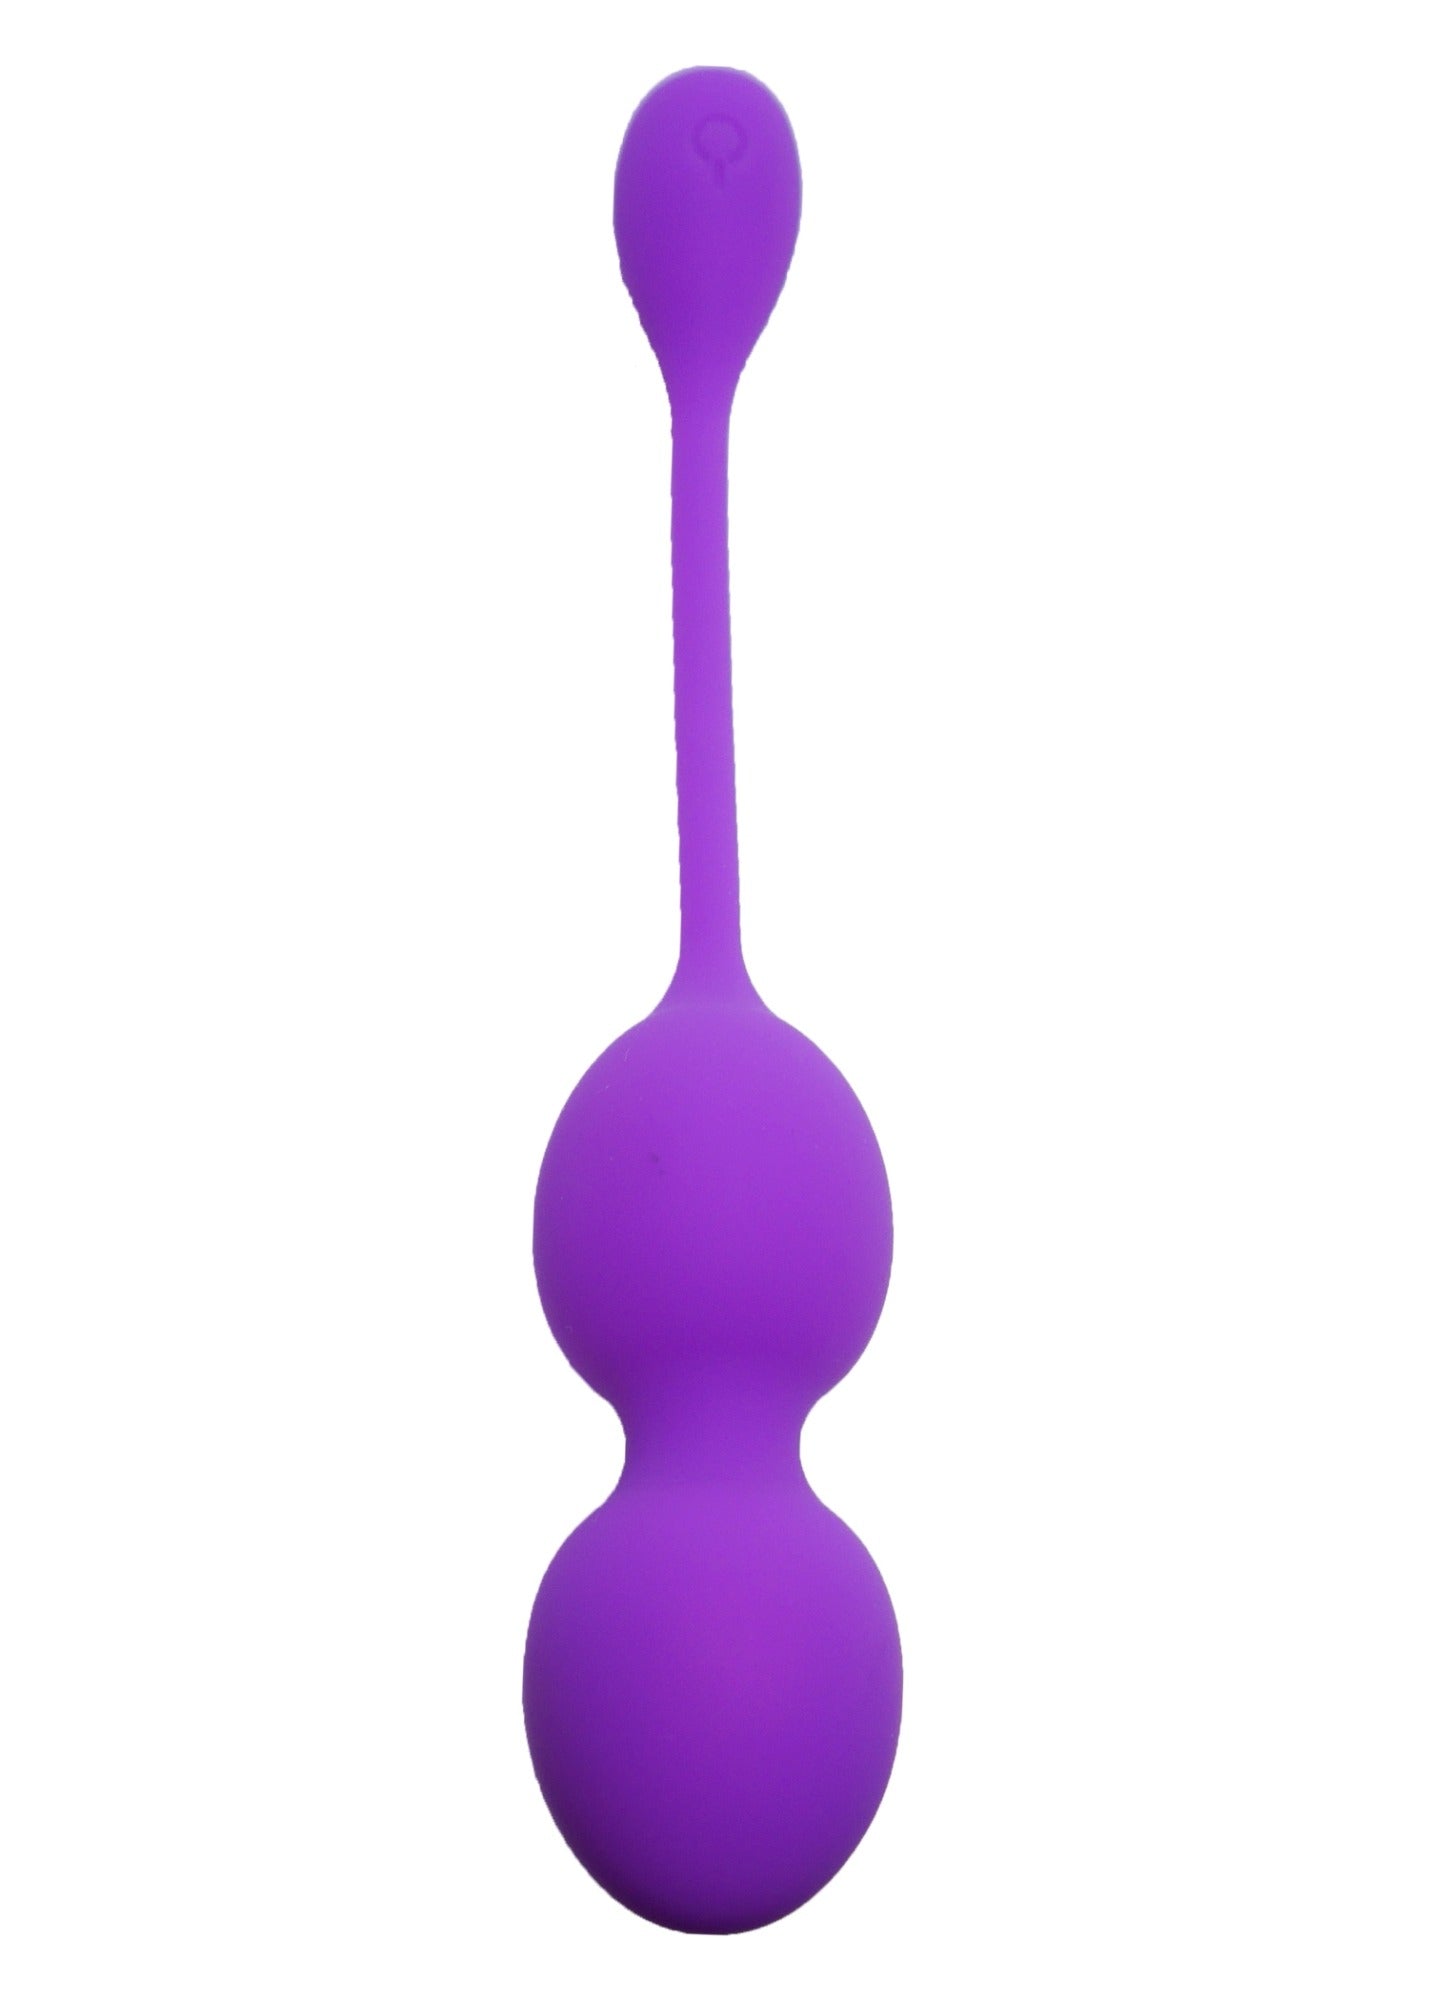 Bossoftoys - 75-00014 - Silicone Kegel Balls - length 16,5 cm - width  32mm  - 80g - 10 functions - Purple - strong blister